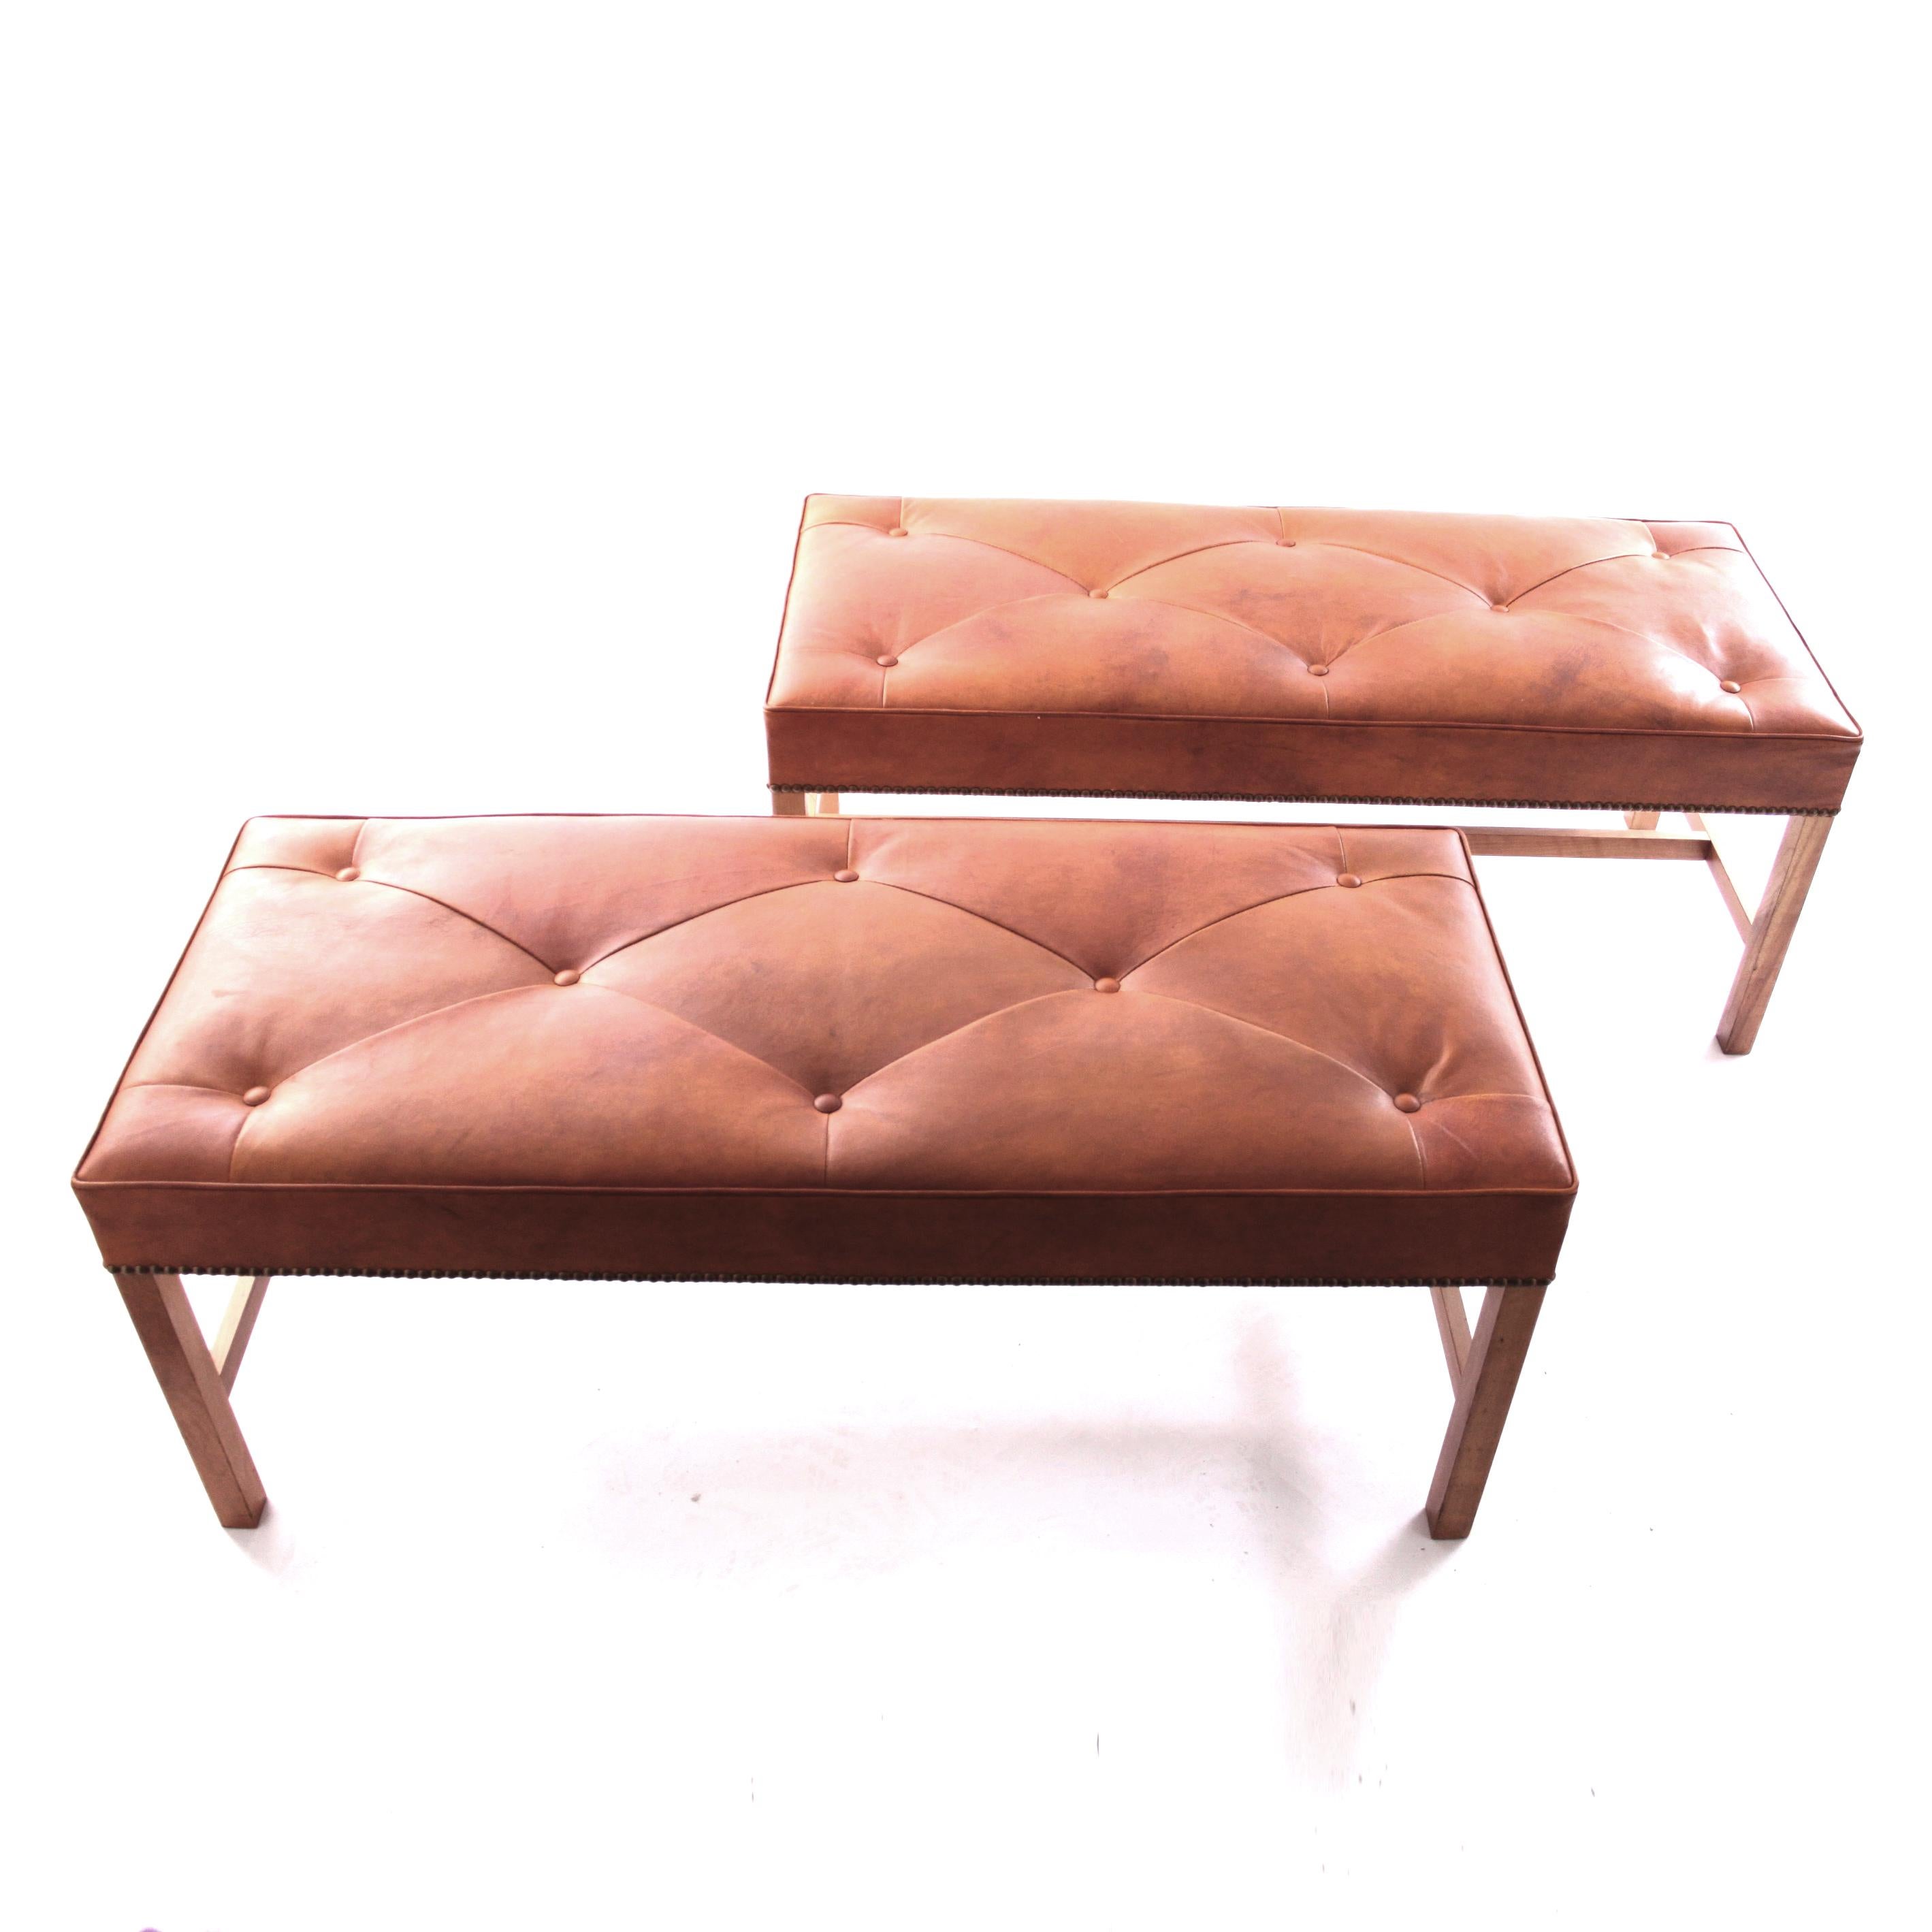 JOSEF FRANK AND SVENSKT TENN   - SCANDINAVIAN MODERN

A beautiful pair of benches by Josef Frank for Svenskt Tenn, Model 2082, mahogany frame and Niger leather with nails. 

The model 2082 was designed by Josef Frank in 1950 and the square legs have